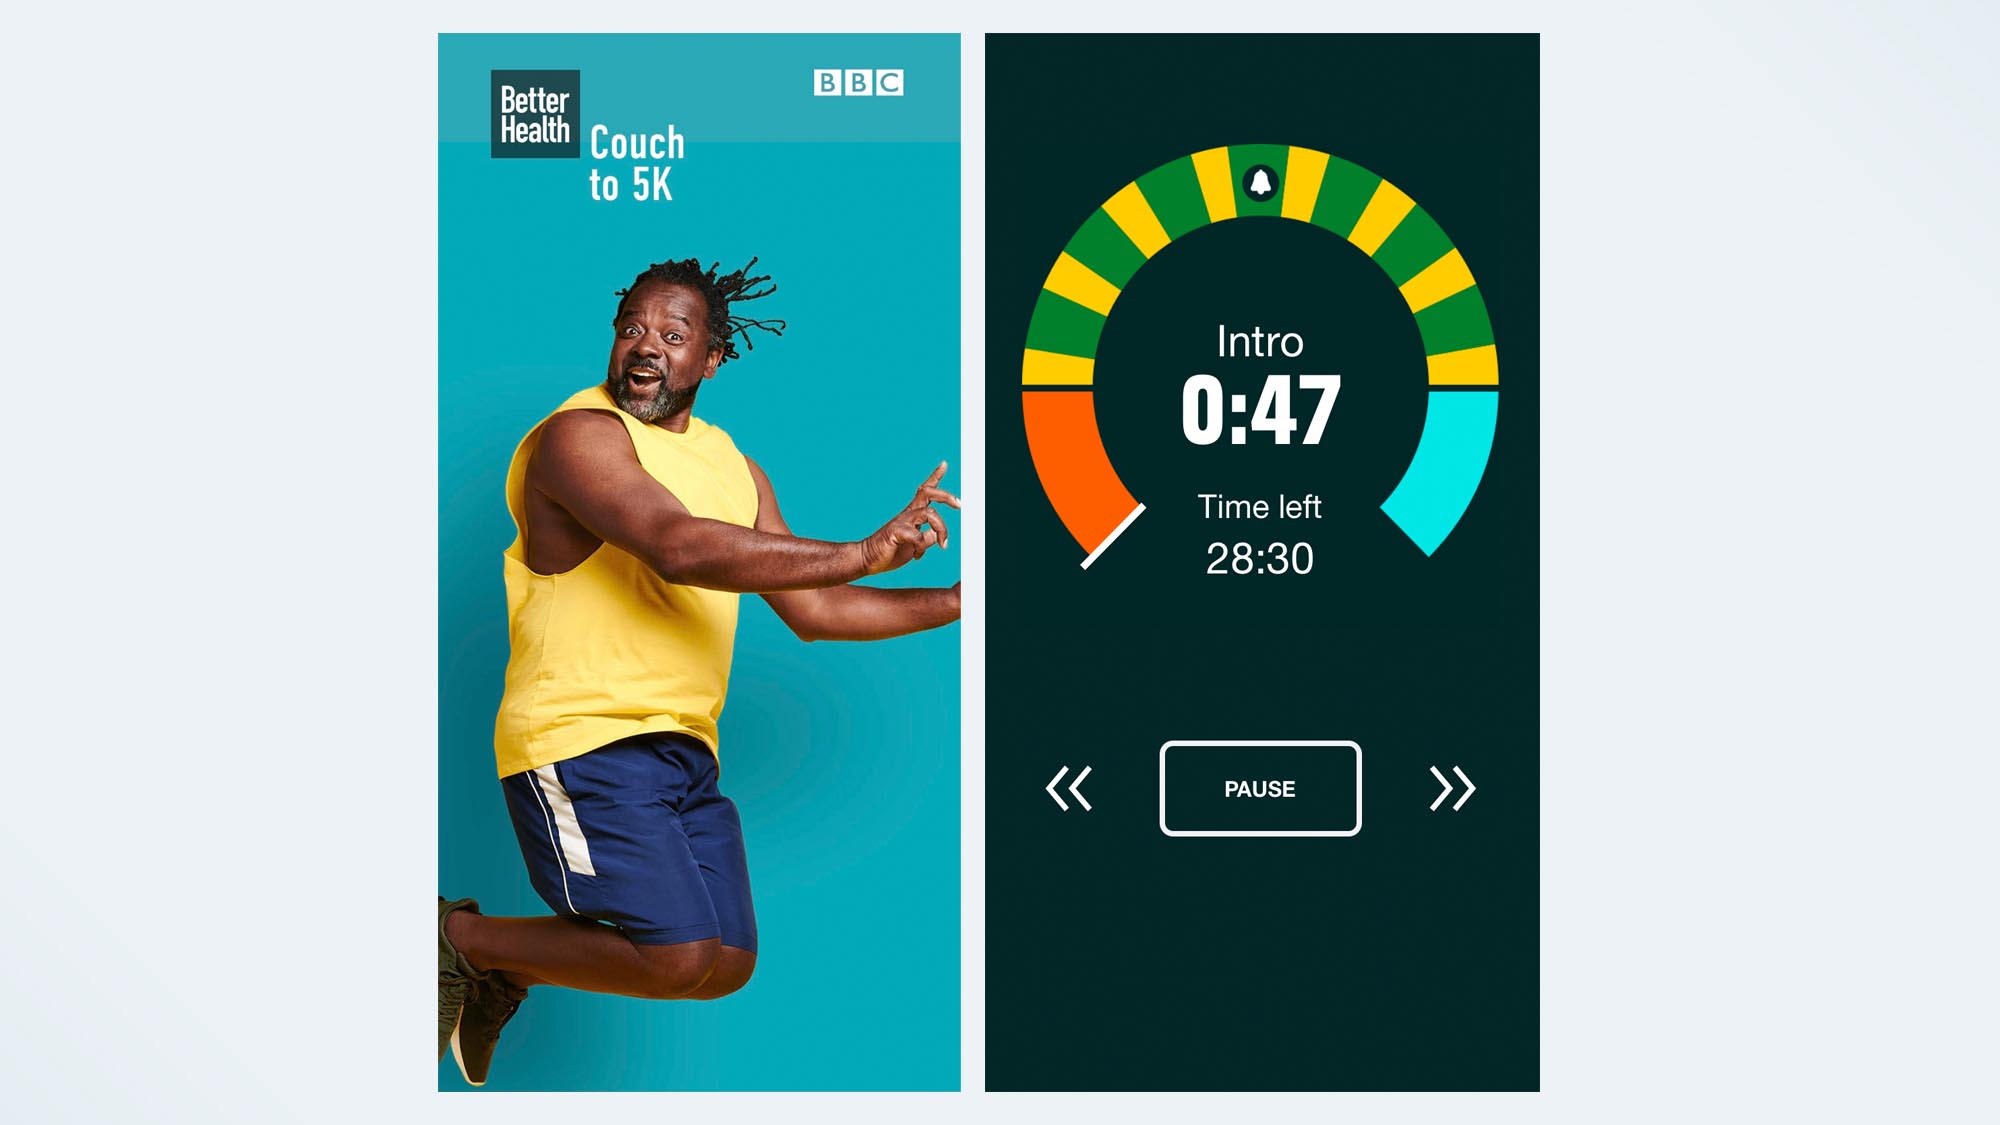 A screenshot of the NHS couch to 5K running app